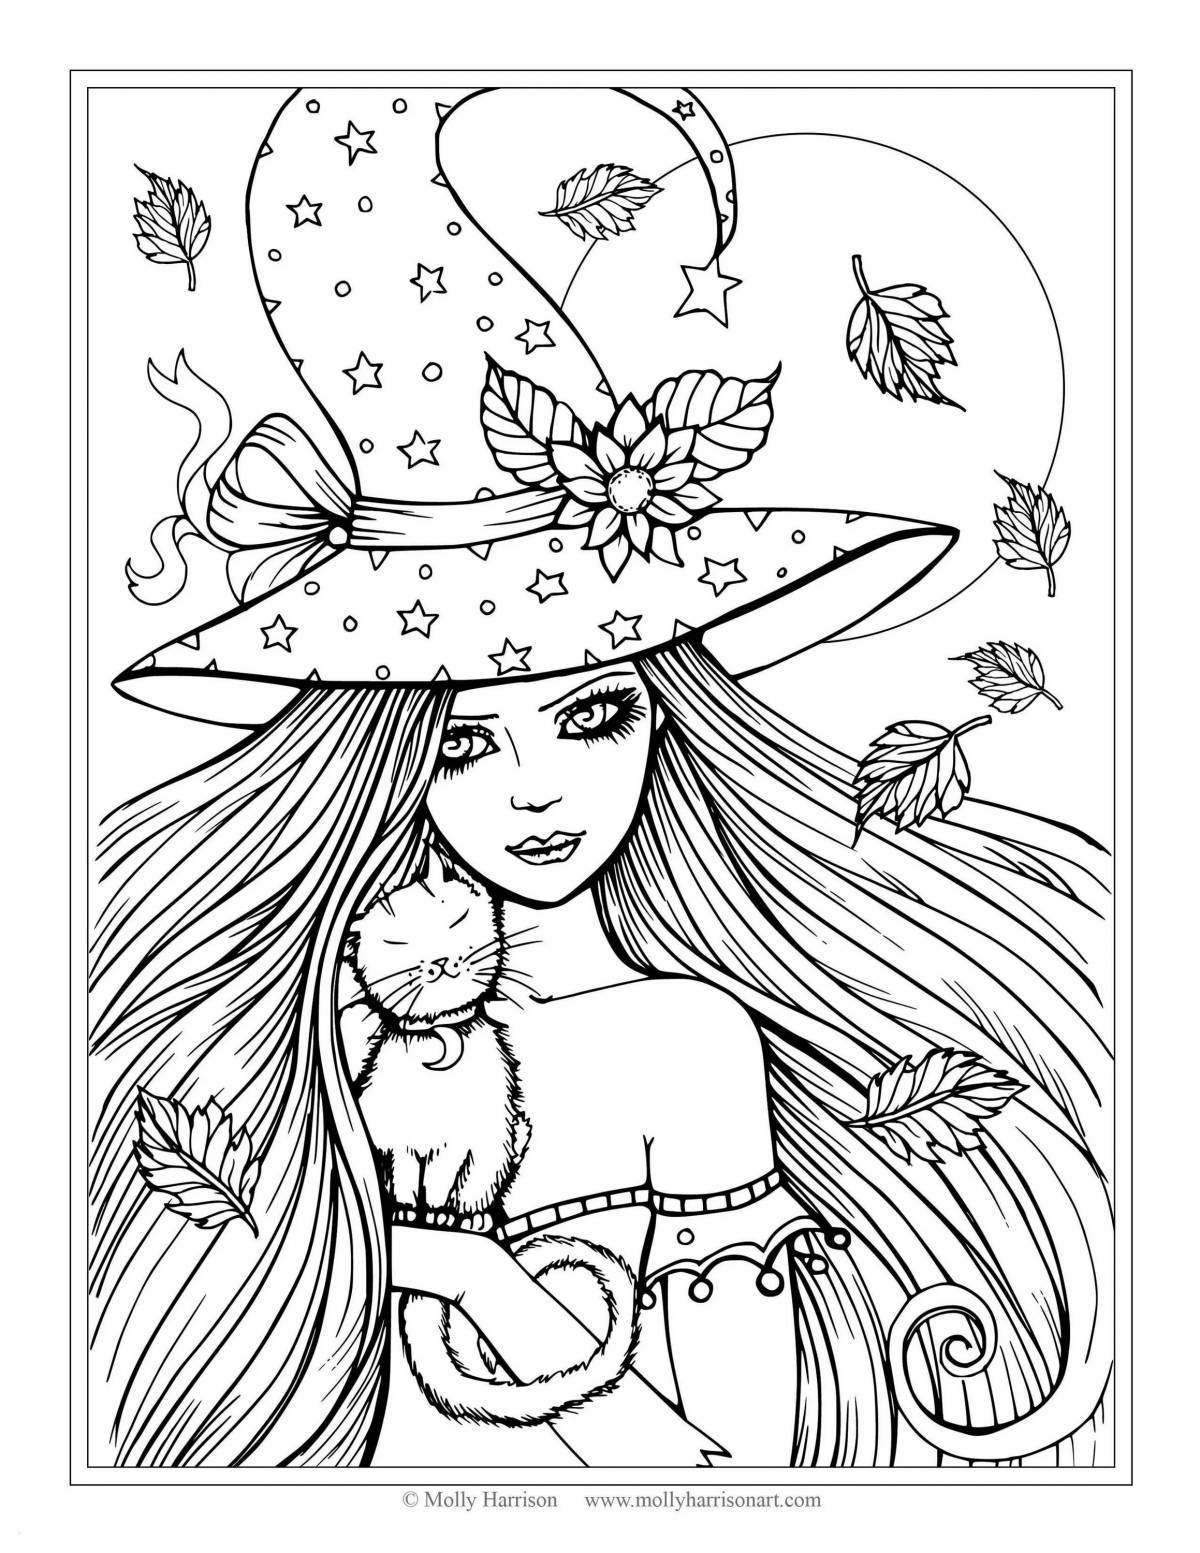 Miss tee's animated coloring book